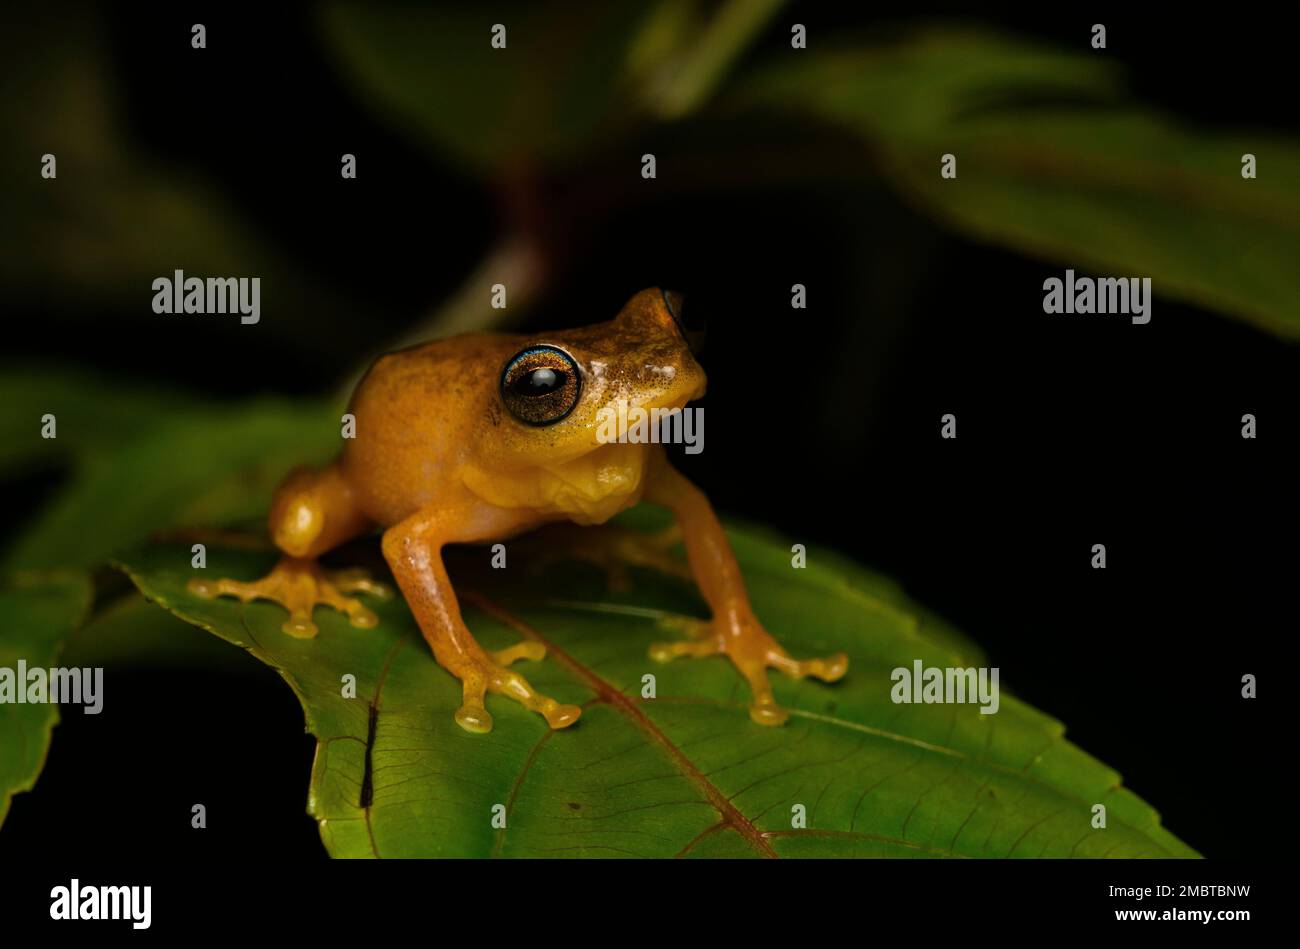 A blue-eyed bush frog resting on top of a leaf inside the agumbe forest on a rainy evening. Stock Photo